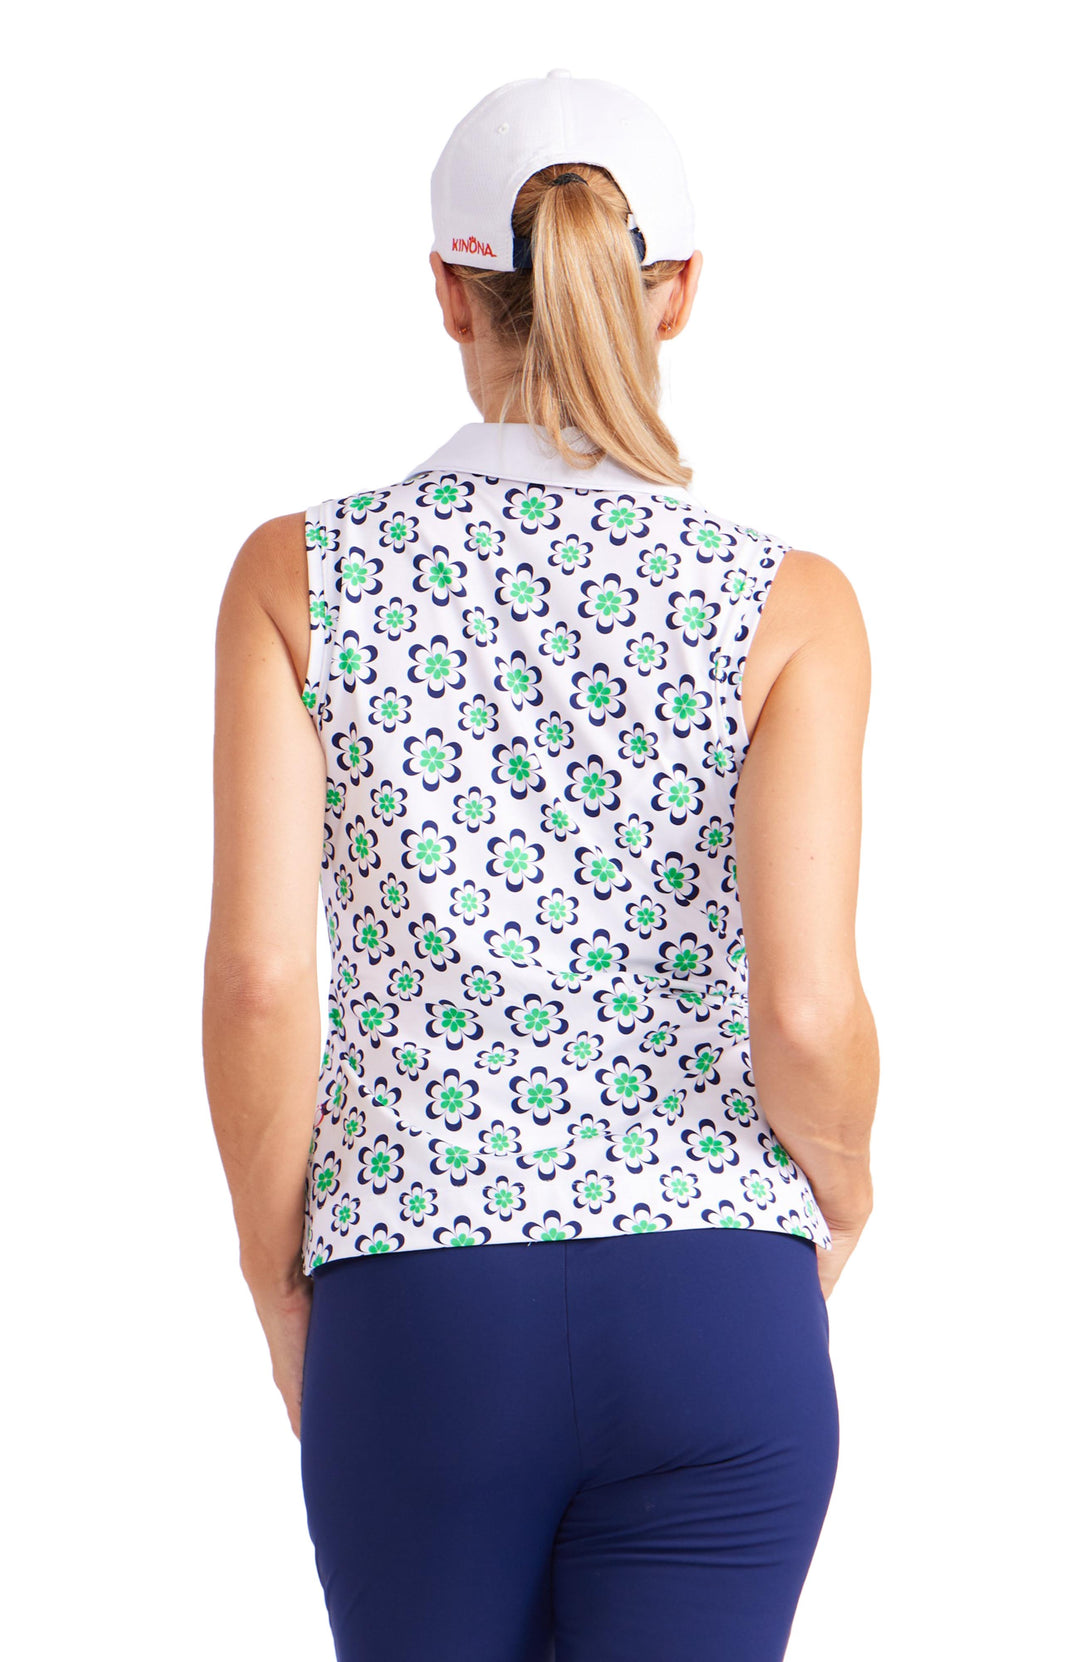 Front facing view of woman wearing sleeveless top with wallpaper floral design and white collar and v-neck trim